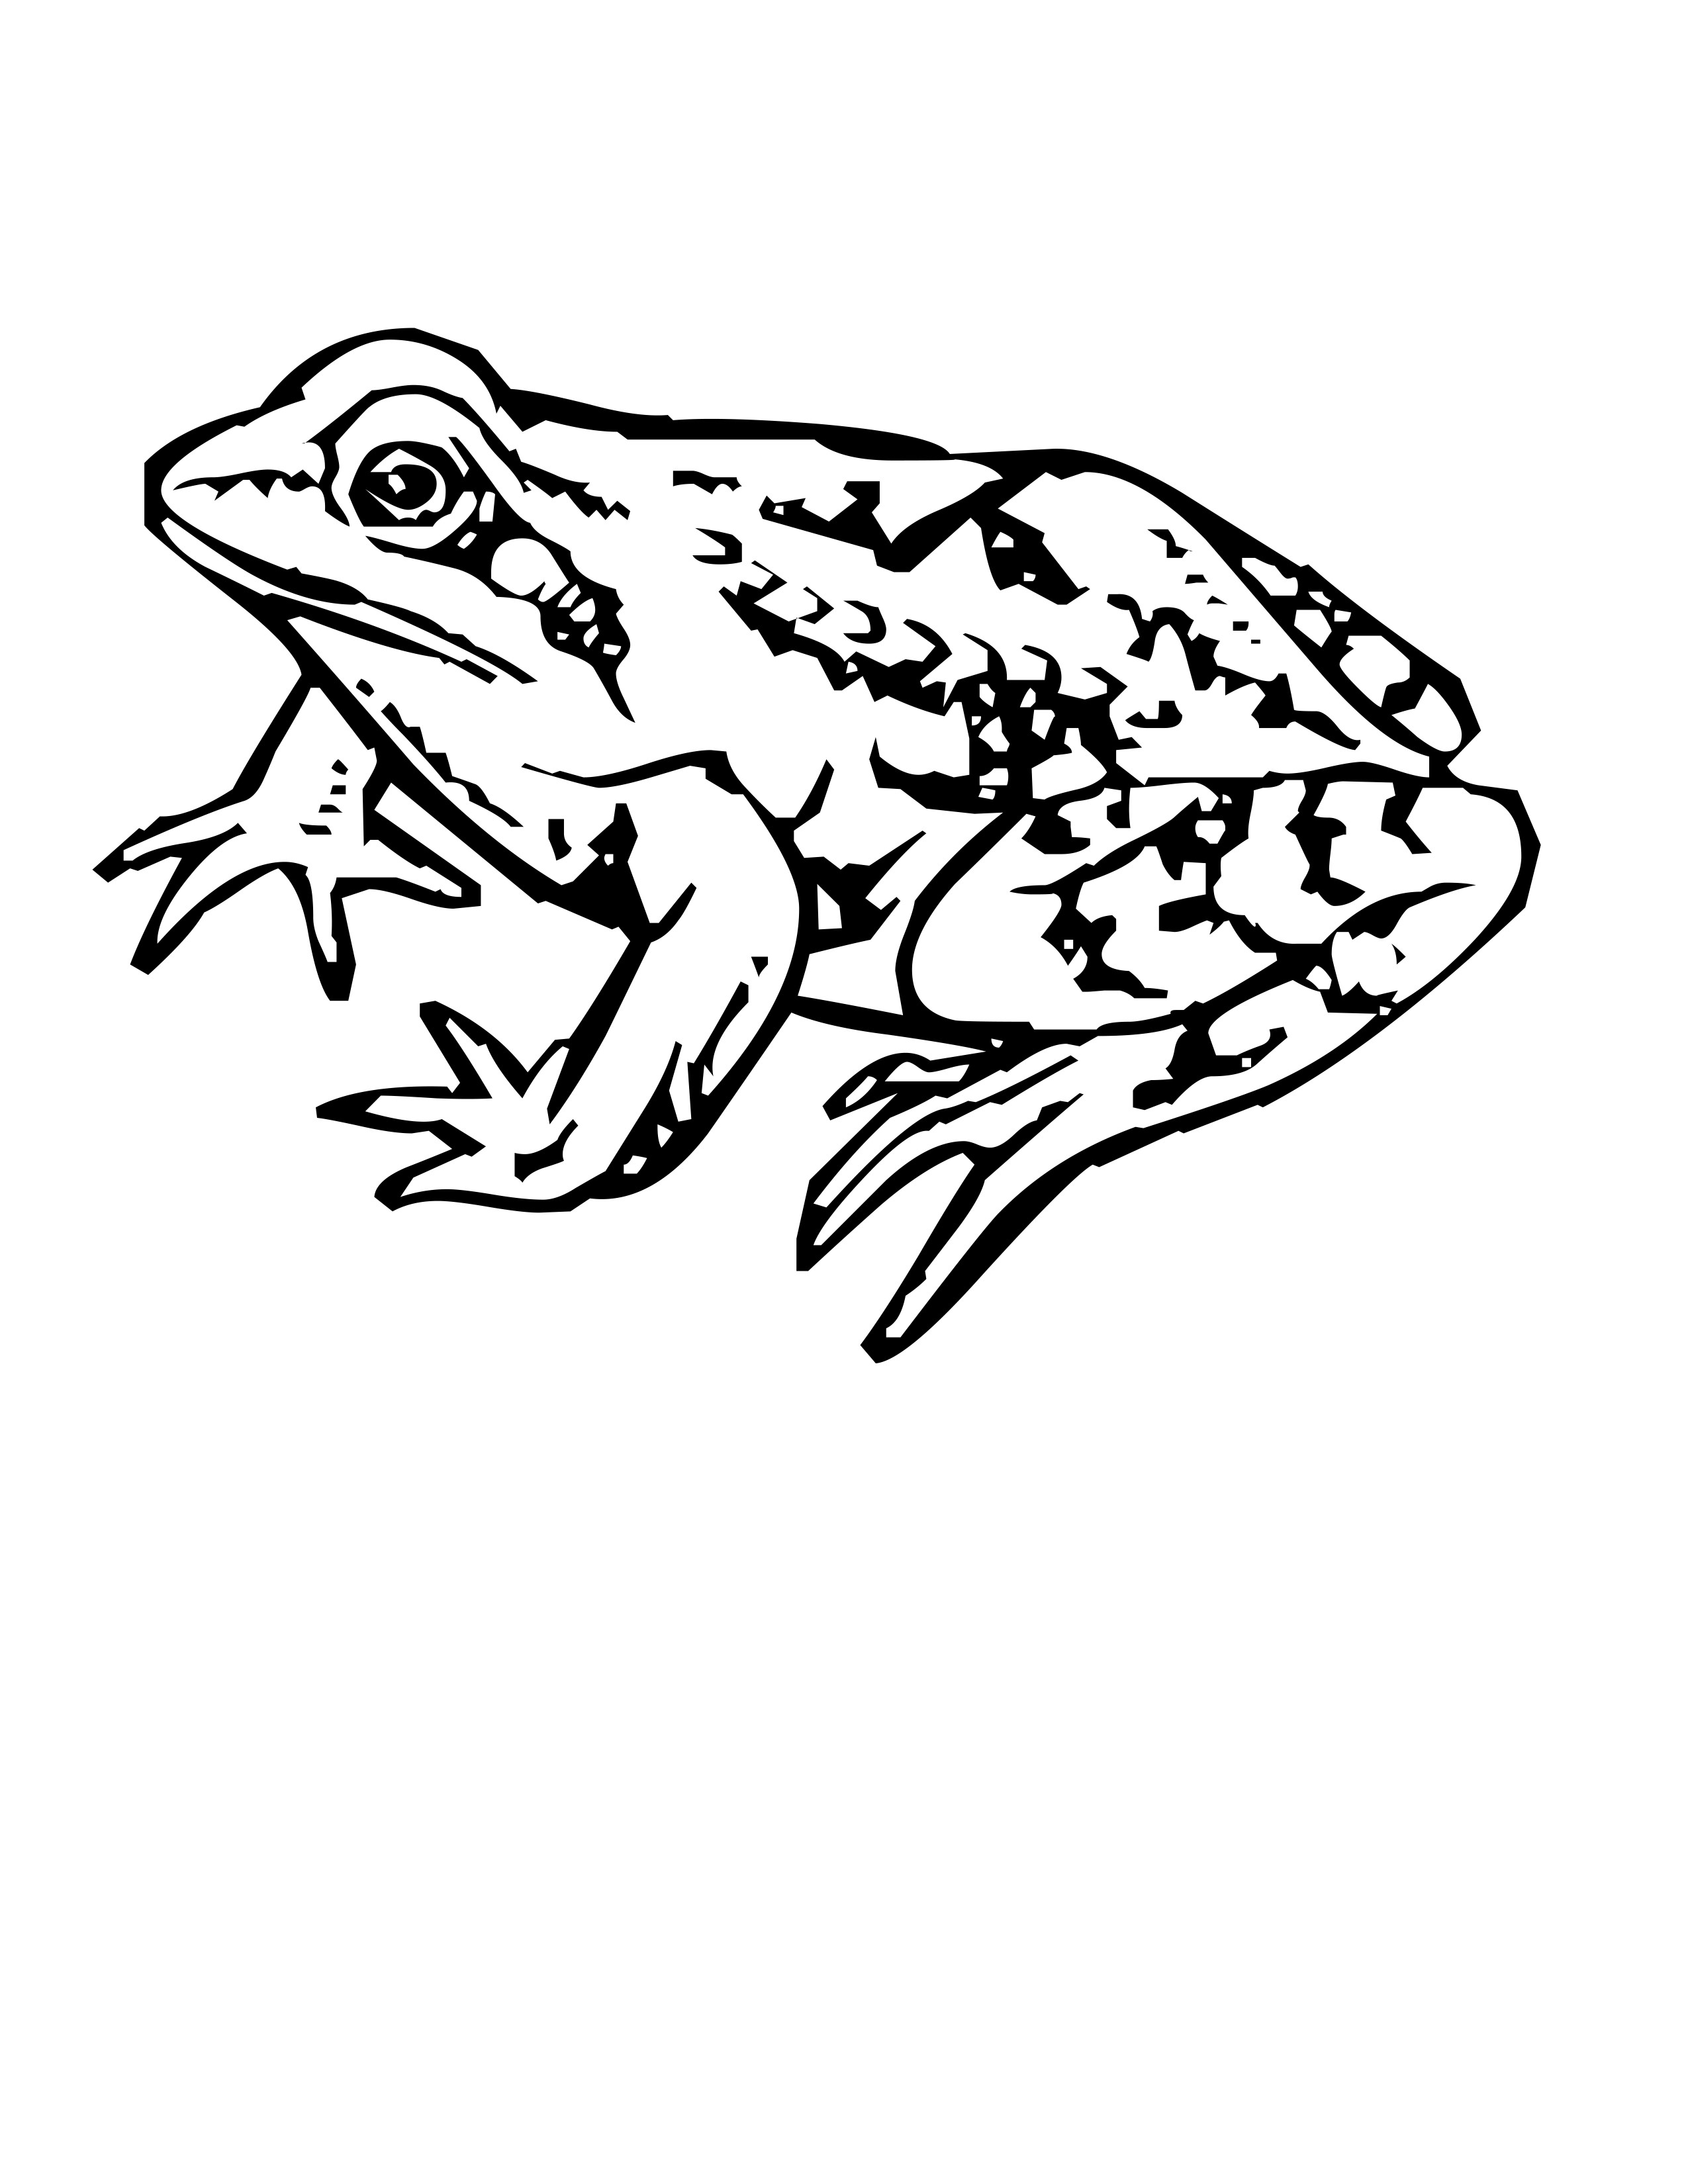 Rainforest Frog Coloring Page Free Frog Coloring Pages